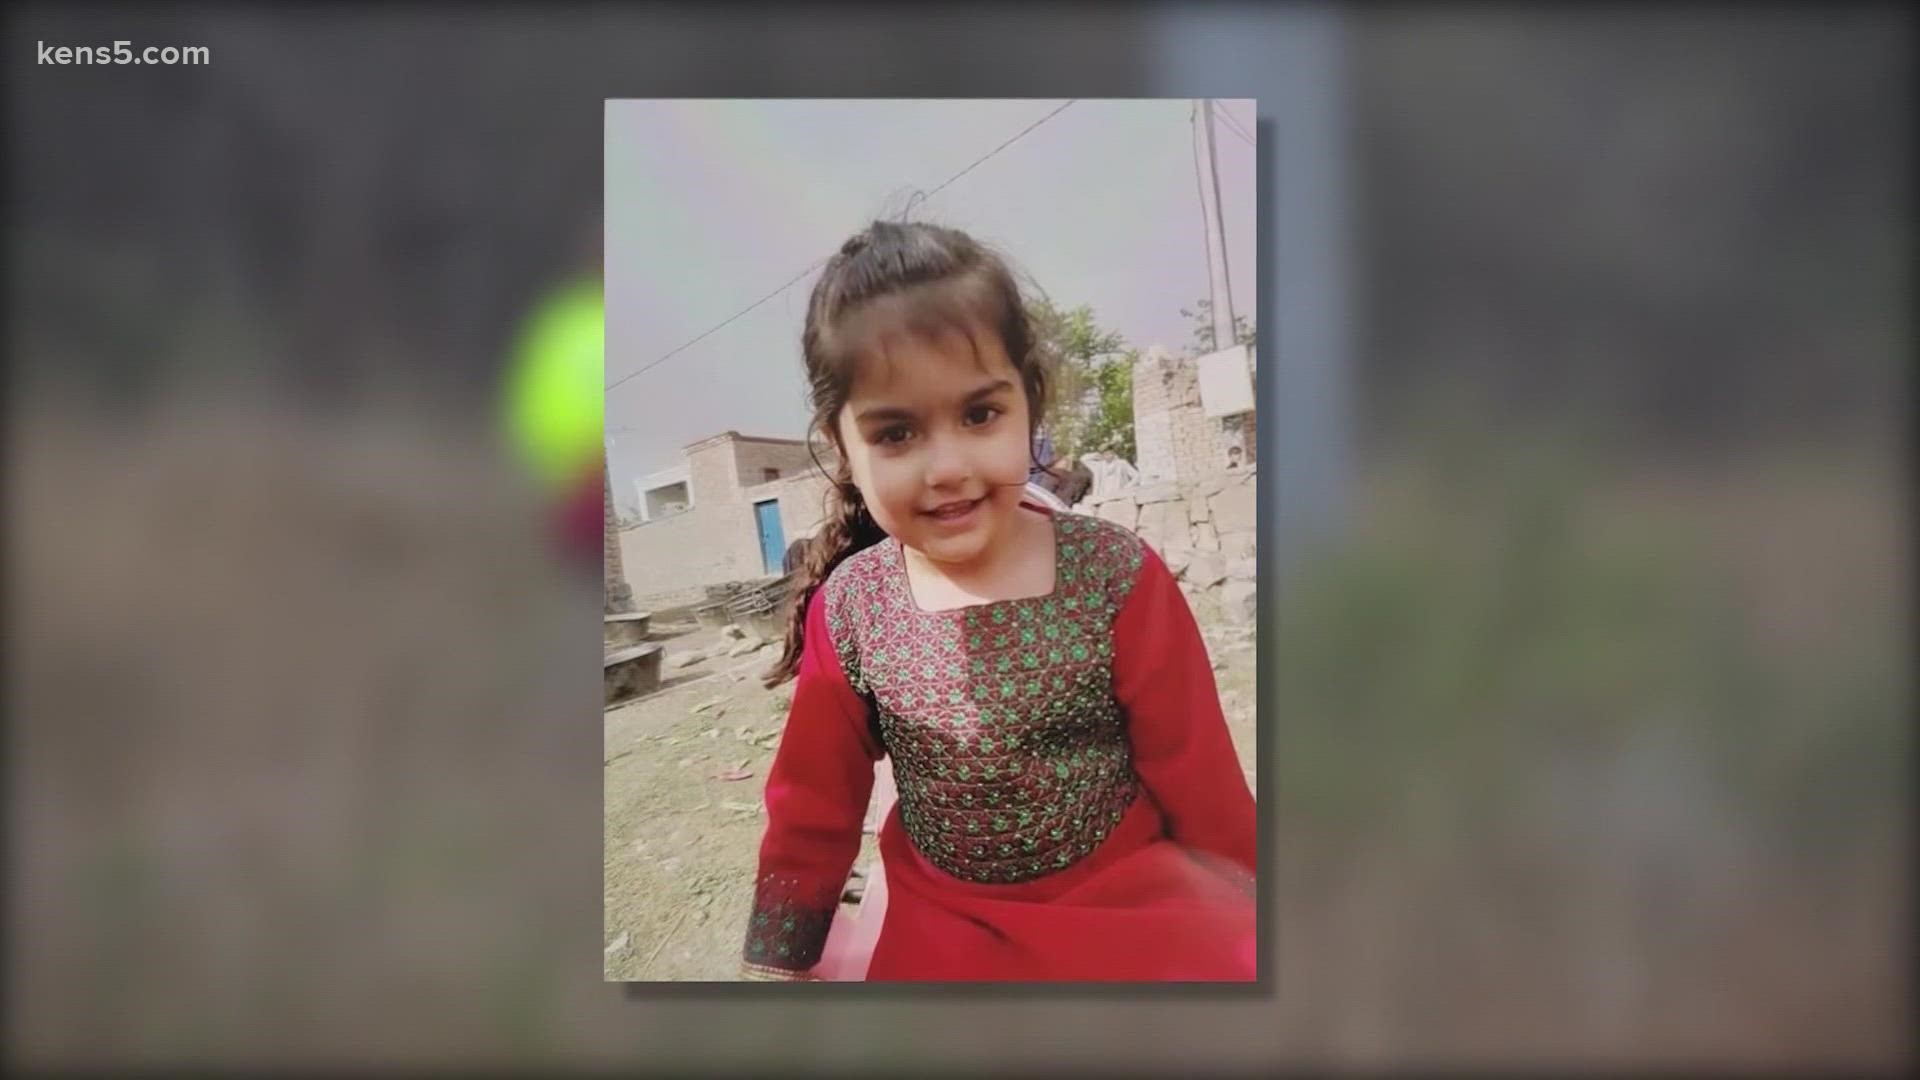 The three-year-old girl has been missing for over a week. The latest on the search that includes SAPD, BCSO, the FBI, and local search and rescue teams.